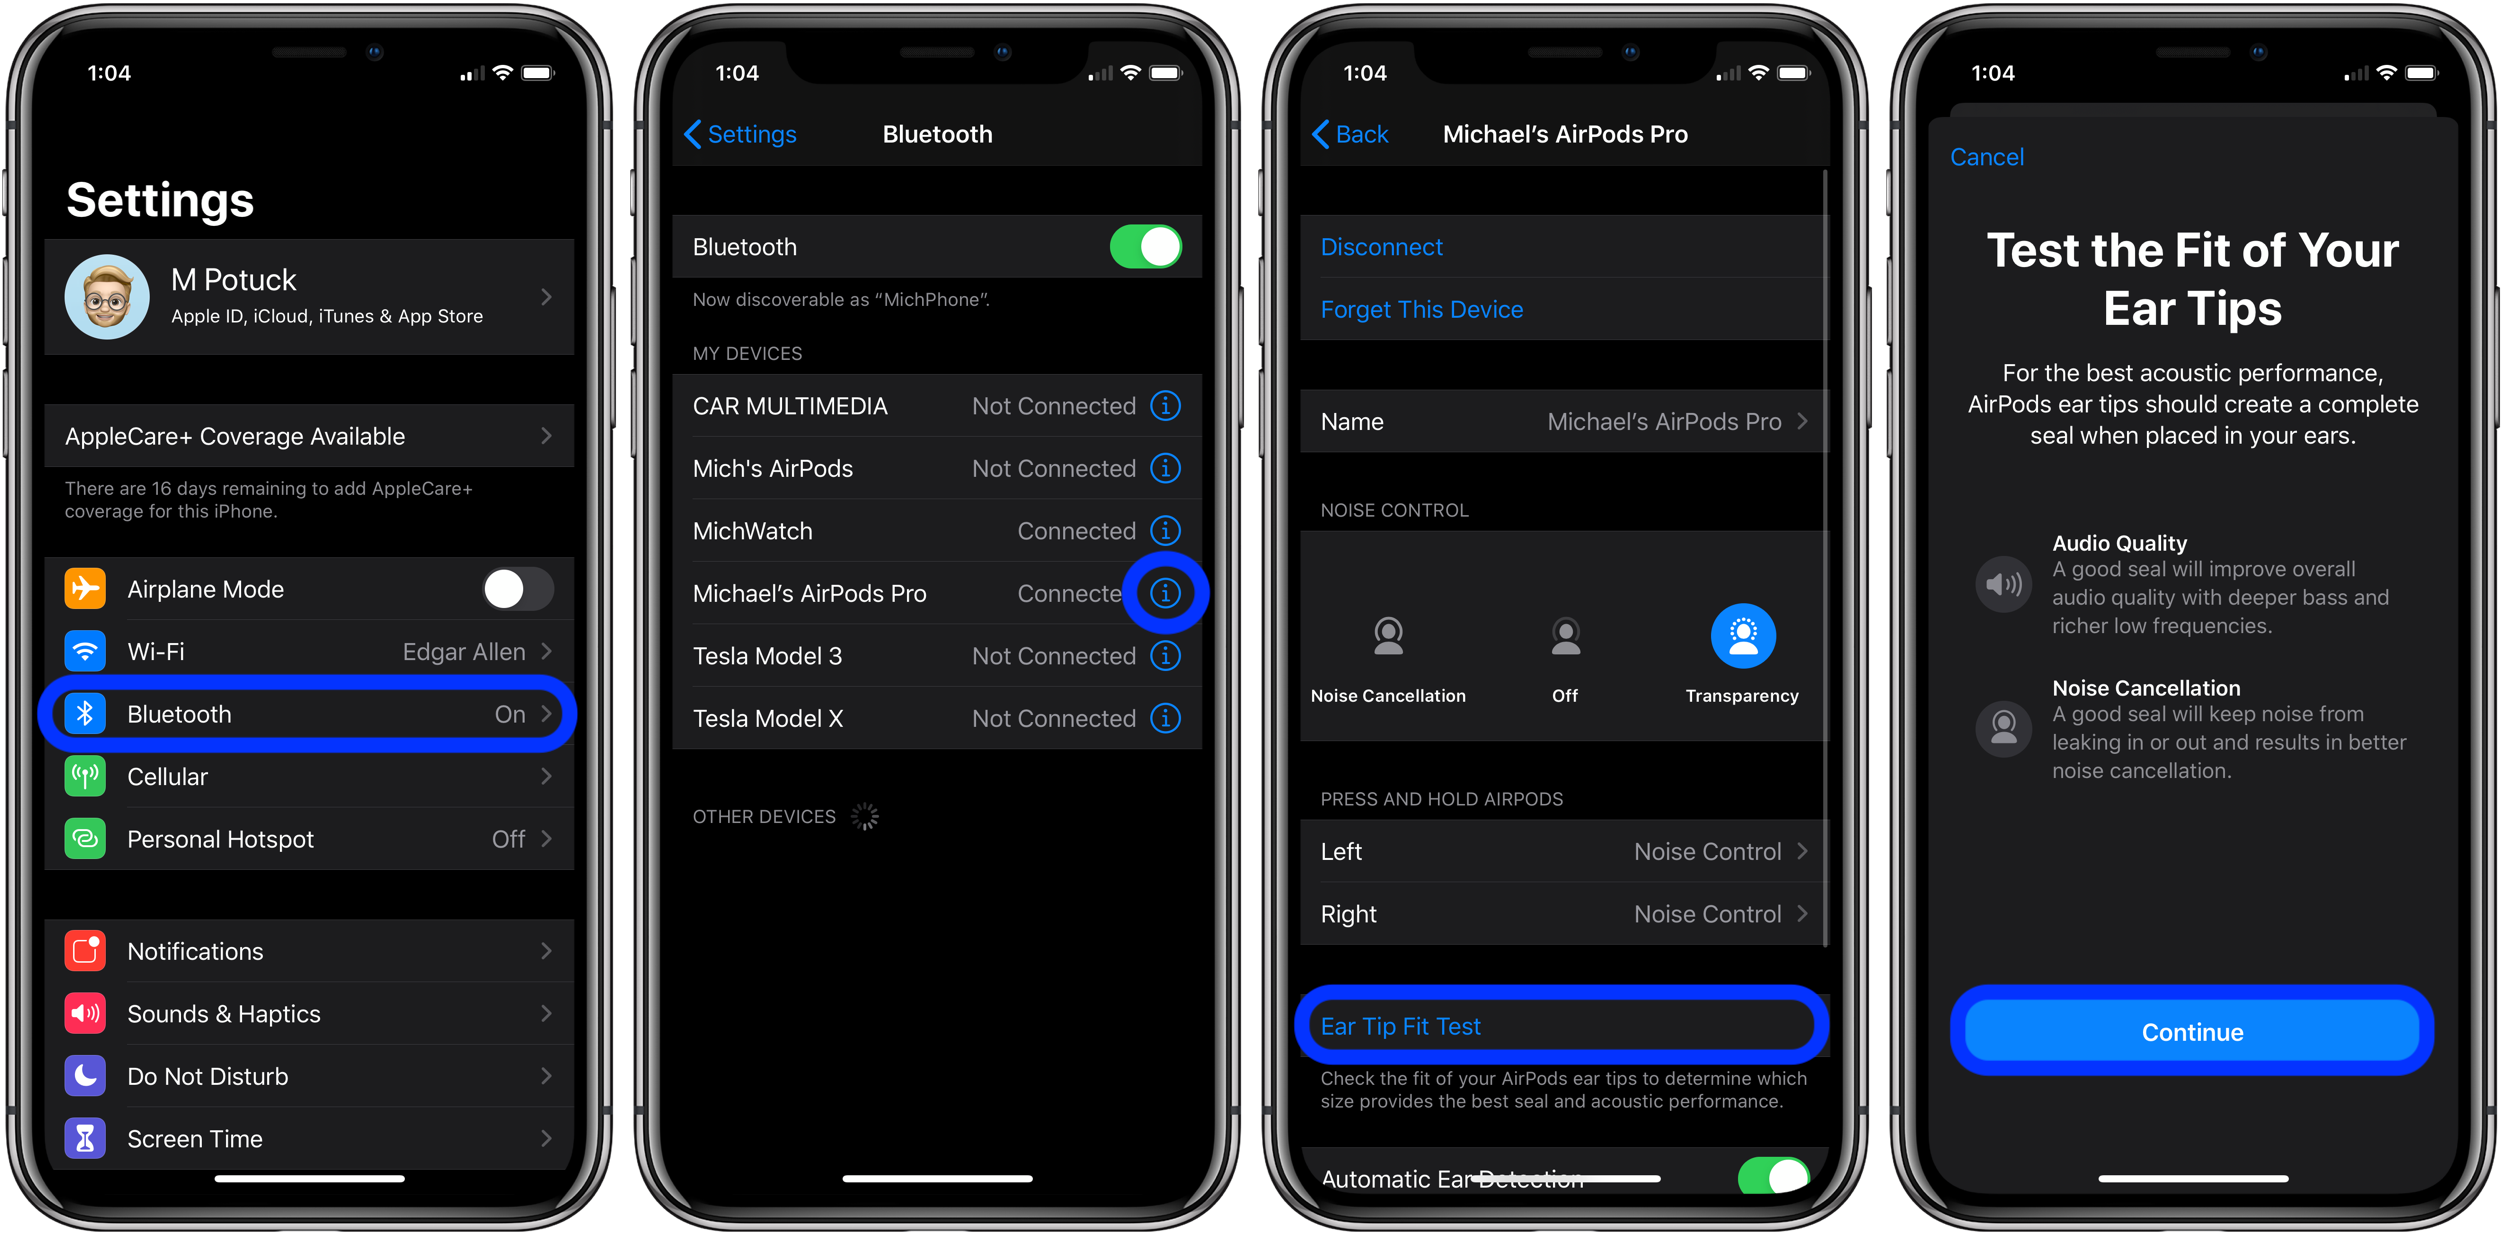 Change Airpods Pro Ear Tips And Run Ear Tips Fit Test - Ios 13 Dark Mode, Hd Png Download